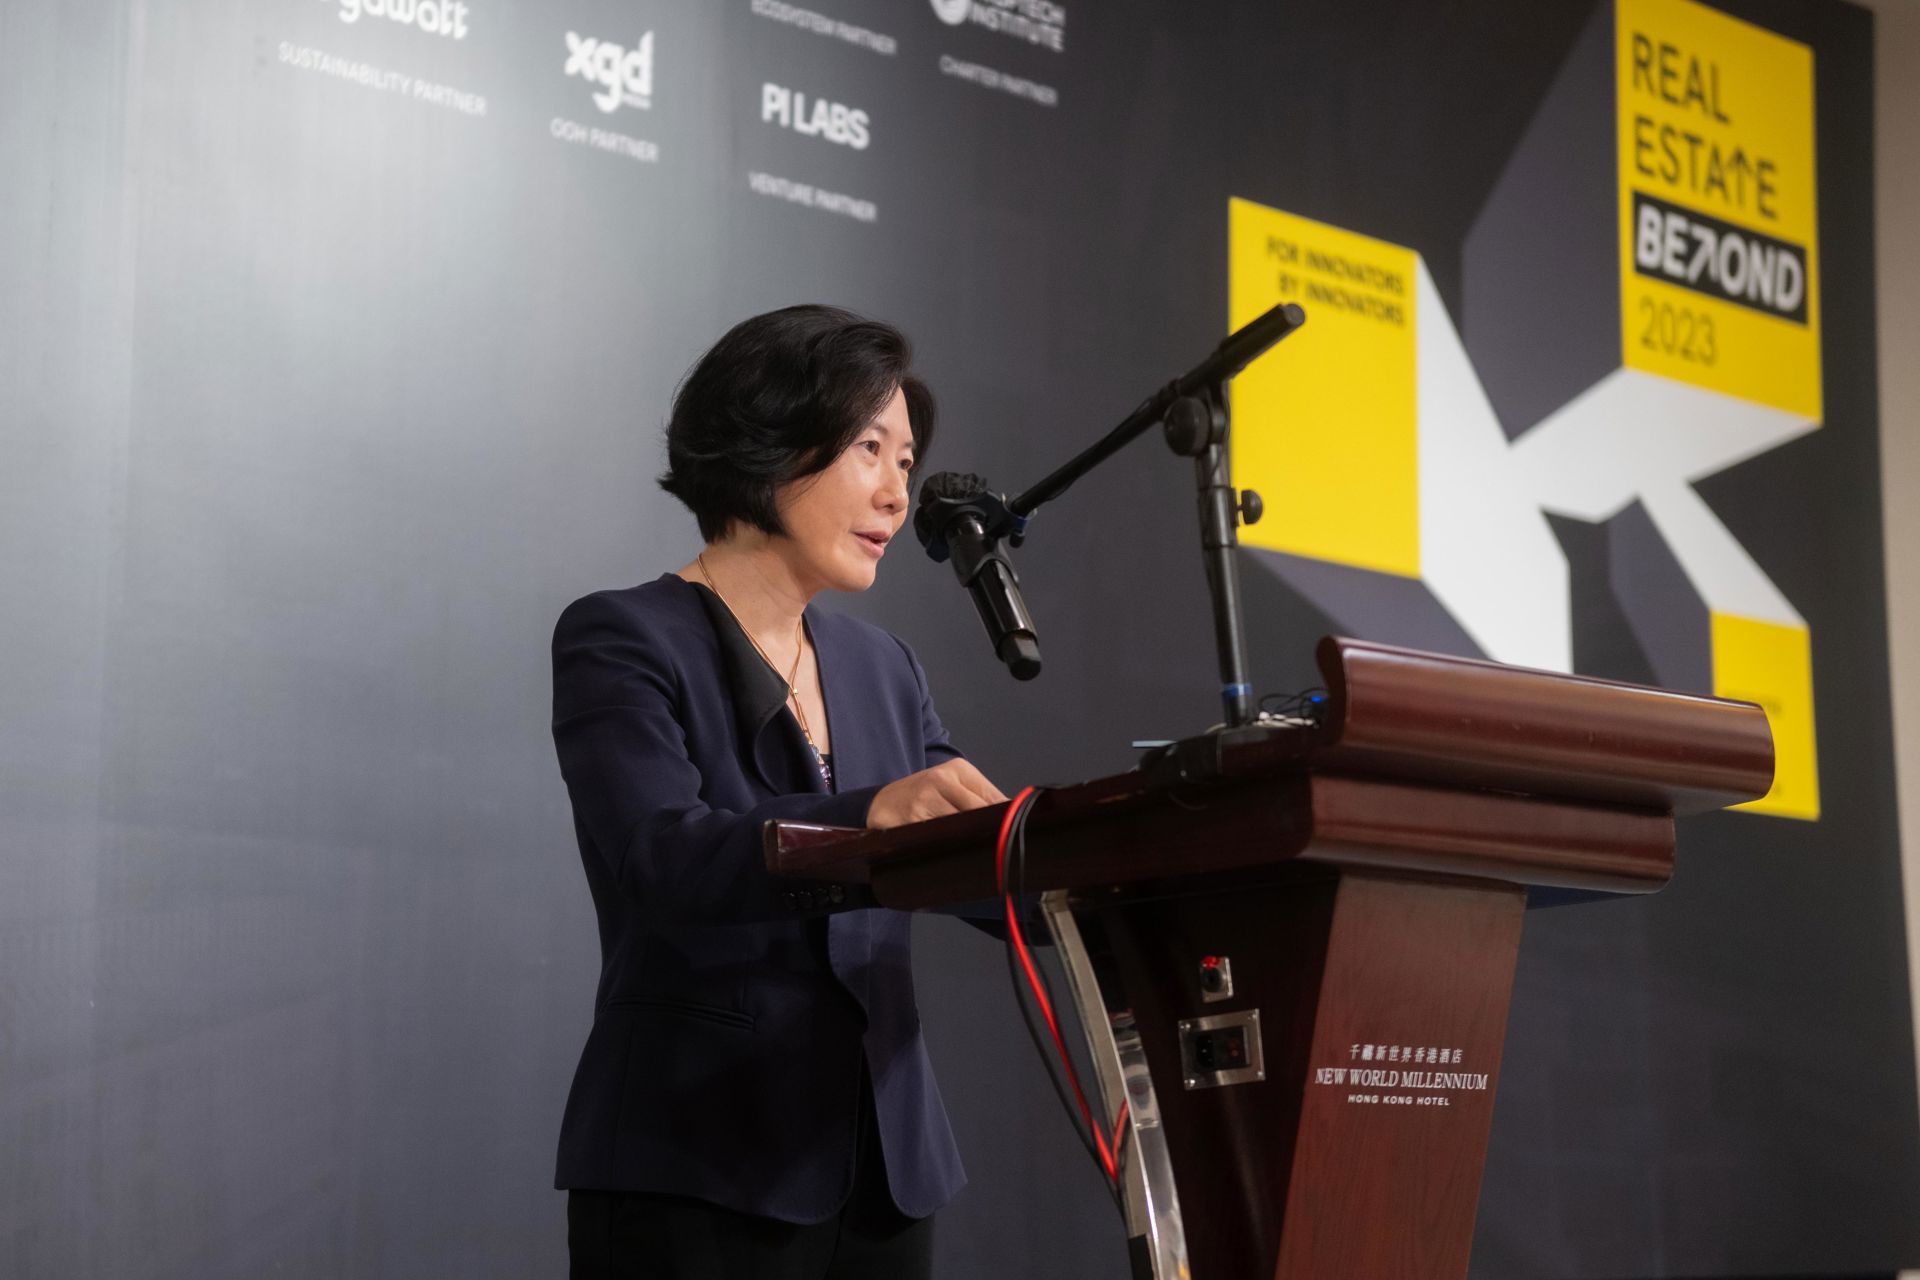 Photo shows the Director-General of Investment Promotion, InvestHK, Ms Alpha Lau, delivering opening remarks at Real Estate Beyond 2023.